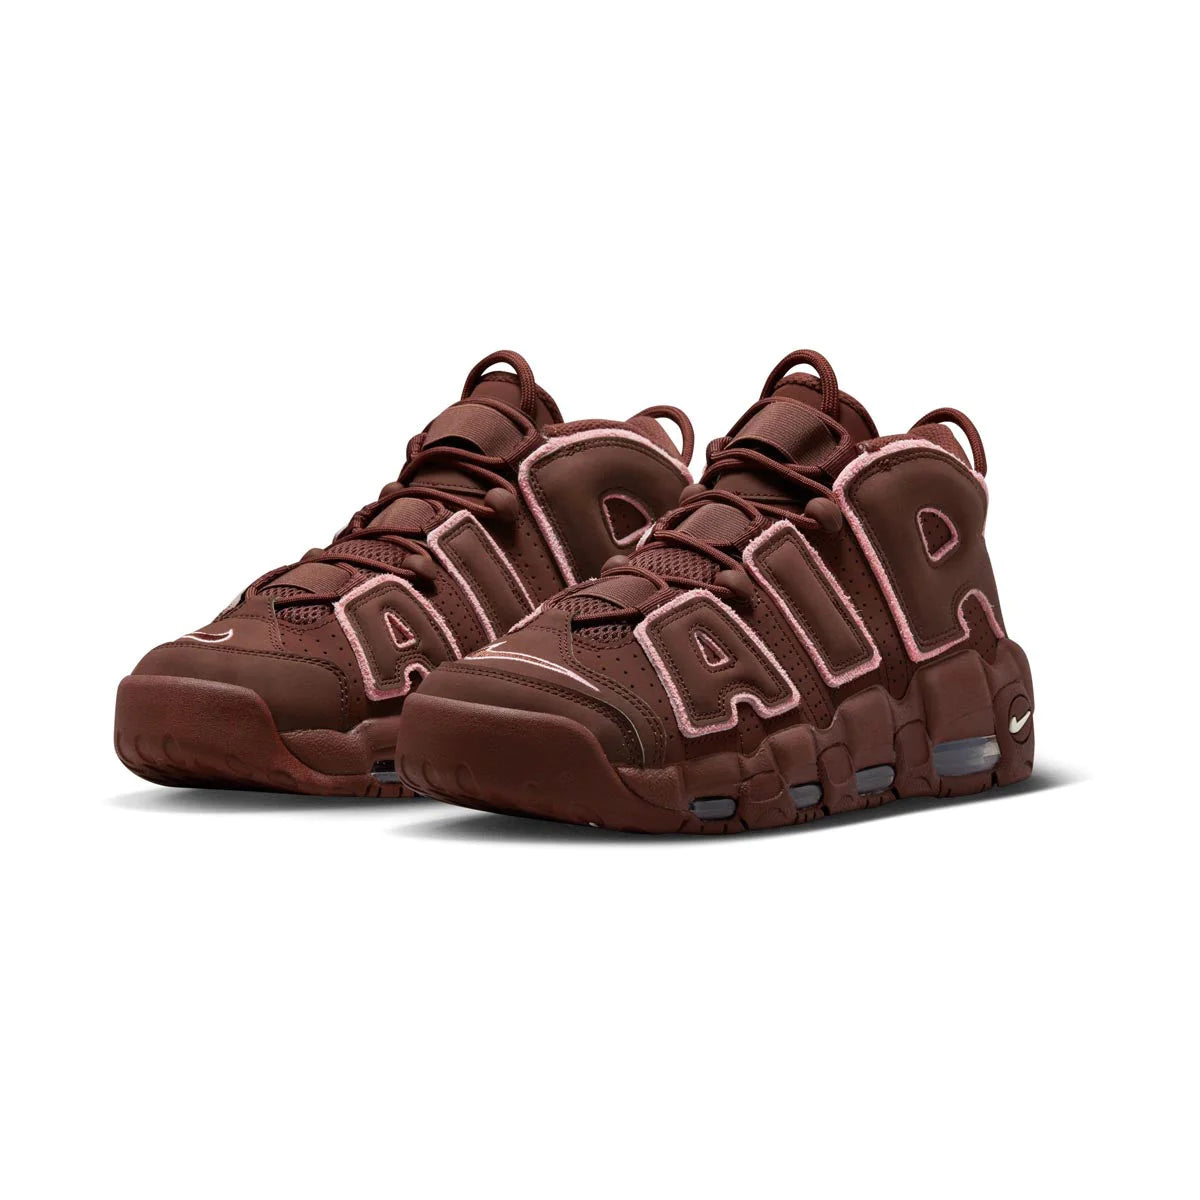 The History of Nike Air Uptempo: How it Continues the Legacy